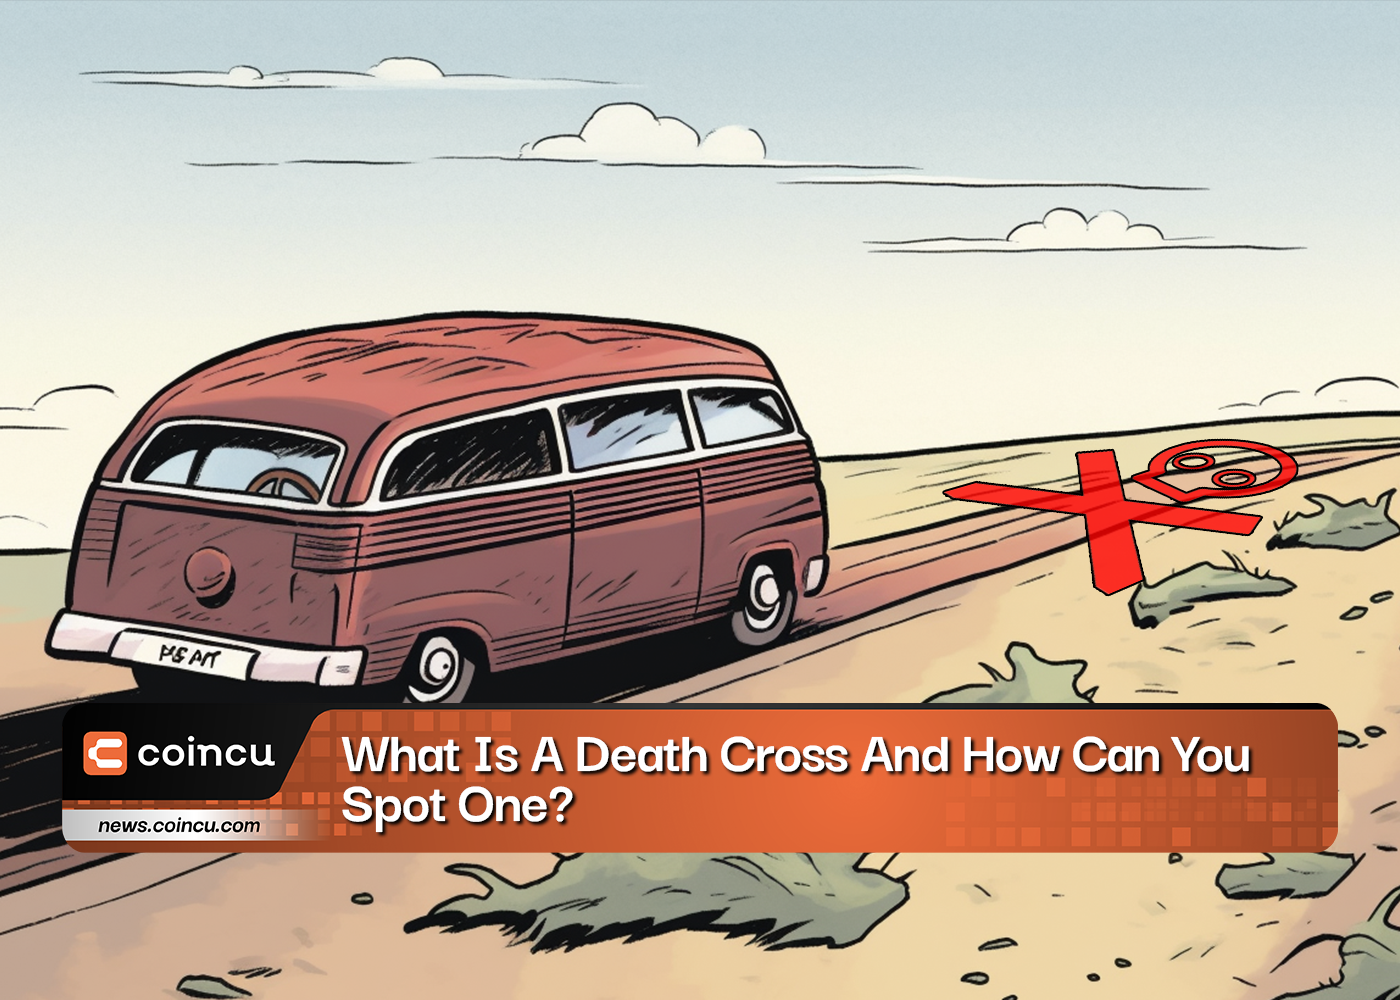 What Is A Death Cross And How Can You Spot One